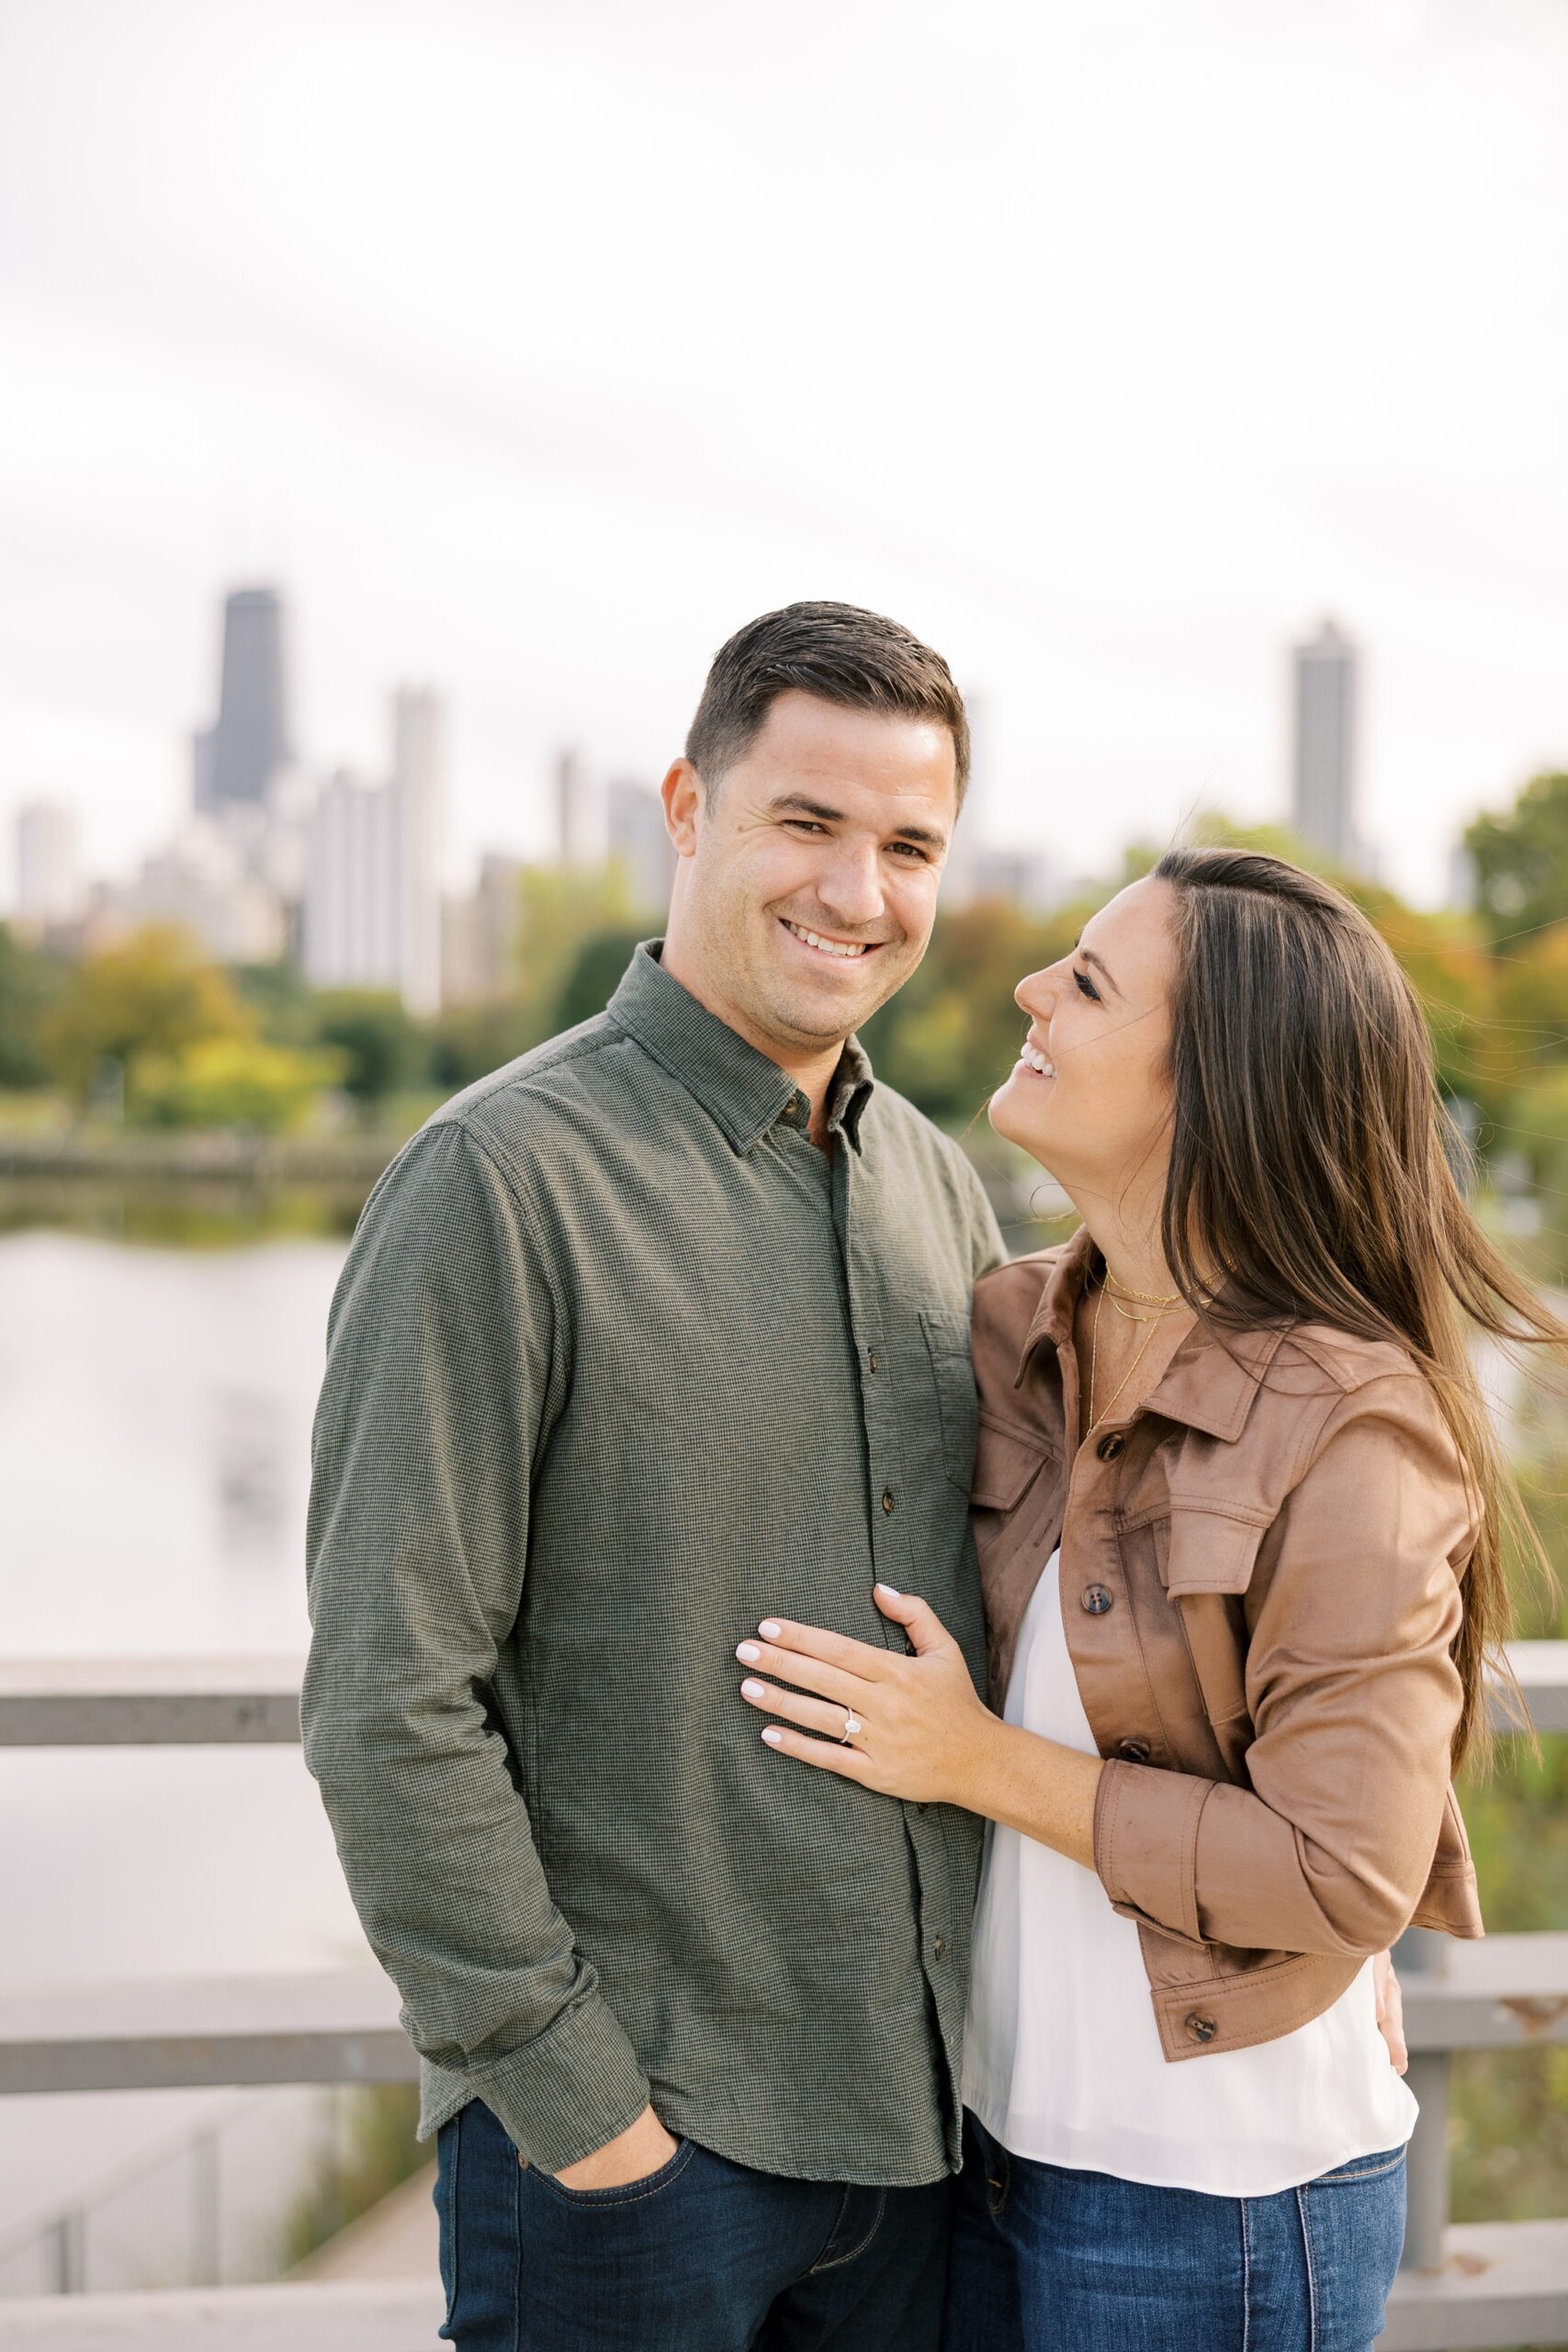 Woman smiles at man with the Chicago skyline behind them